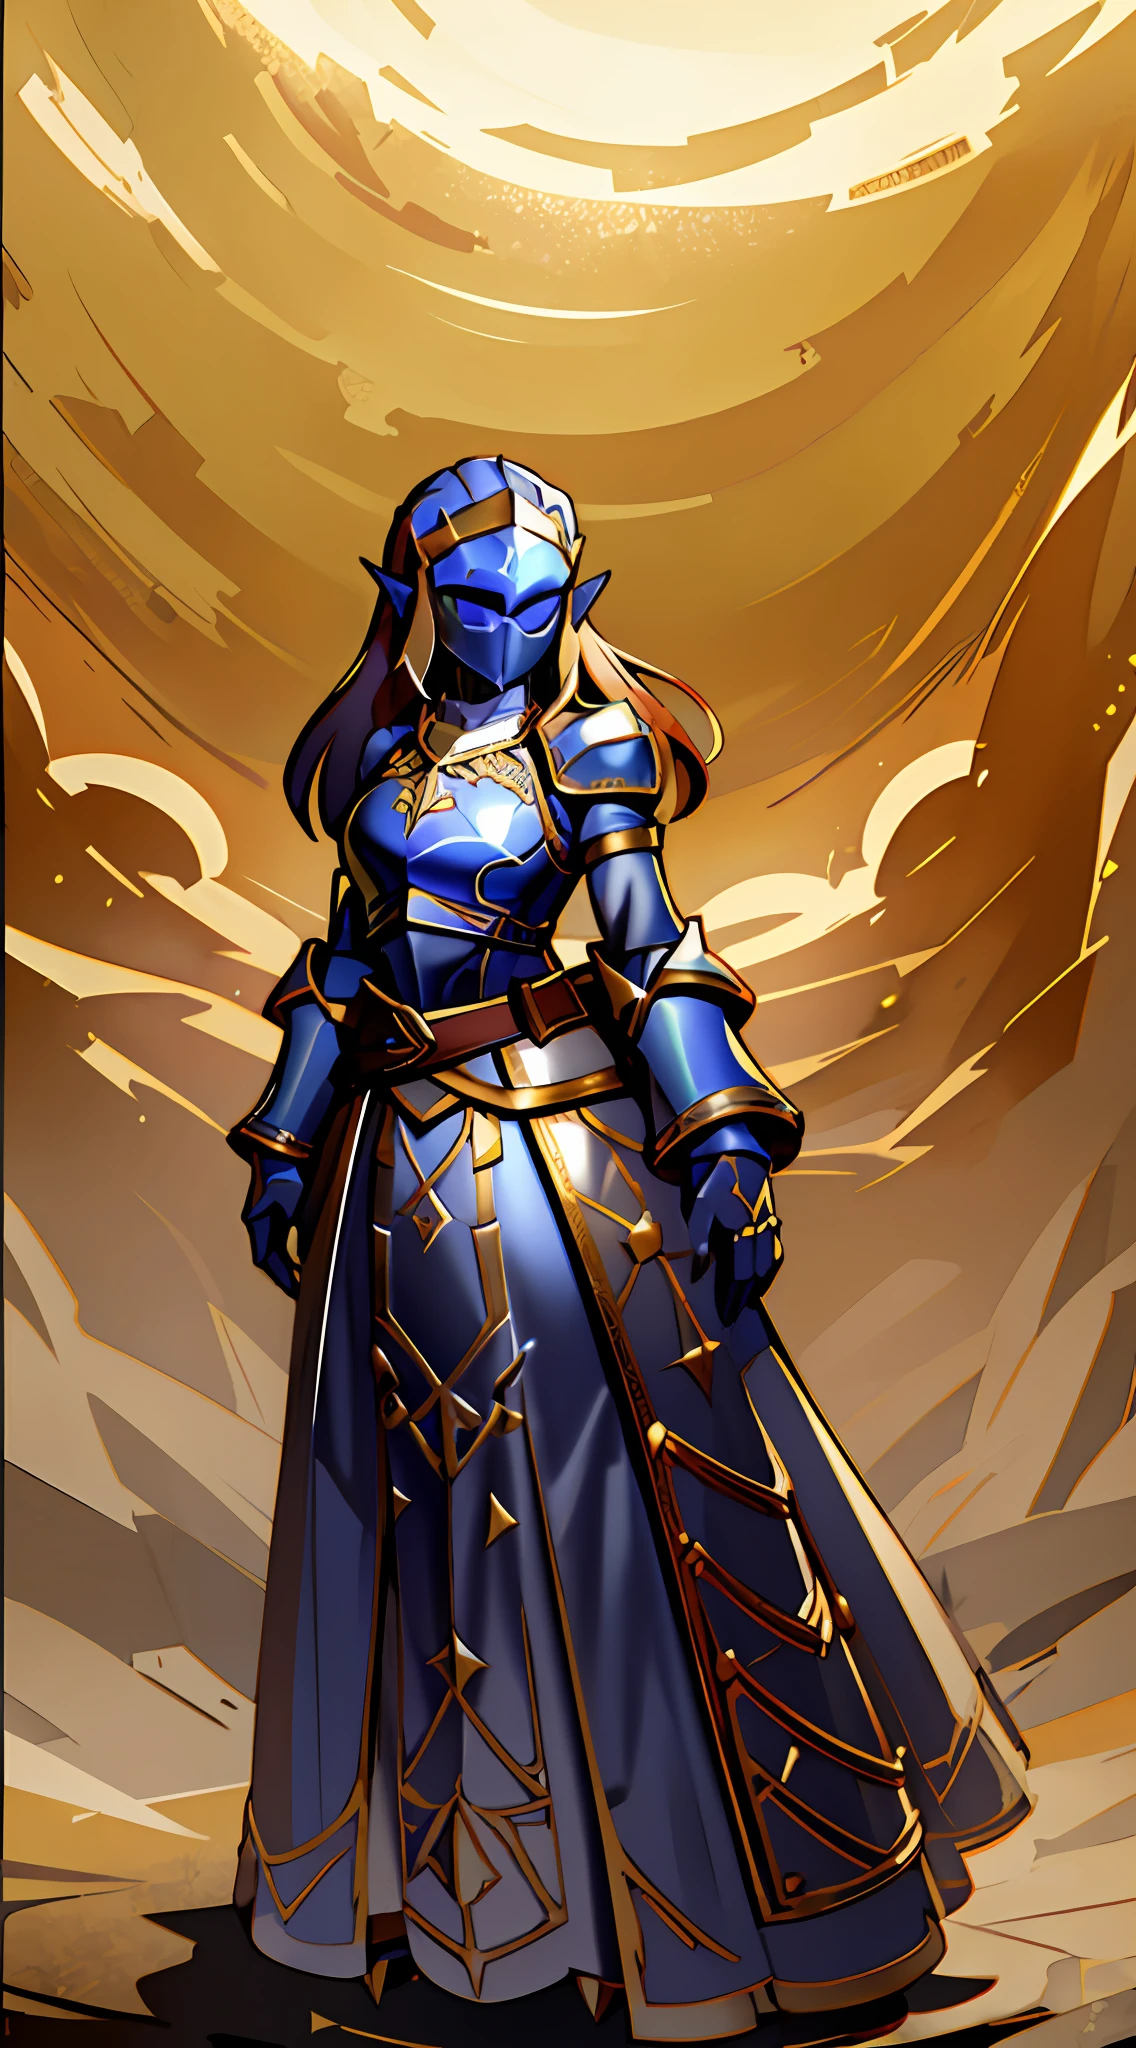 Botw Zelda wearing Heavy knight armor, Botw Themed Knight armor, Royal blue and gold armor, thick armor plating, Gold accents with brown straps, brown belt with gold accents, Heavy Blue armor, Armored dress, Large knight armor, form-fitting knight armor, helmetless, helmet held in arm, wearing princess tiara